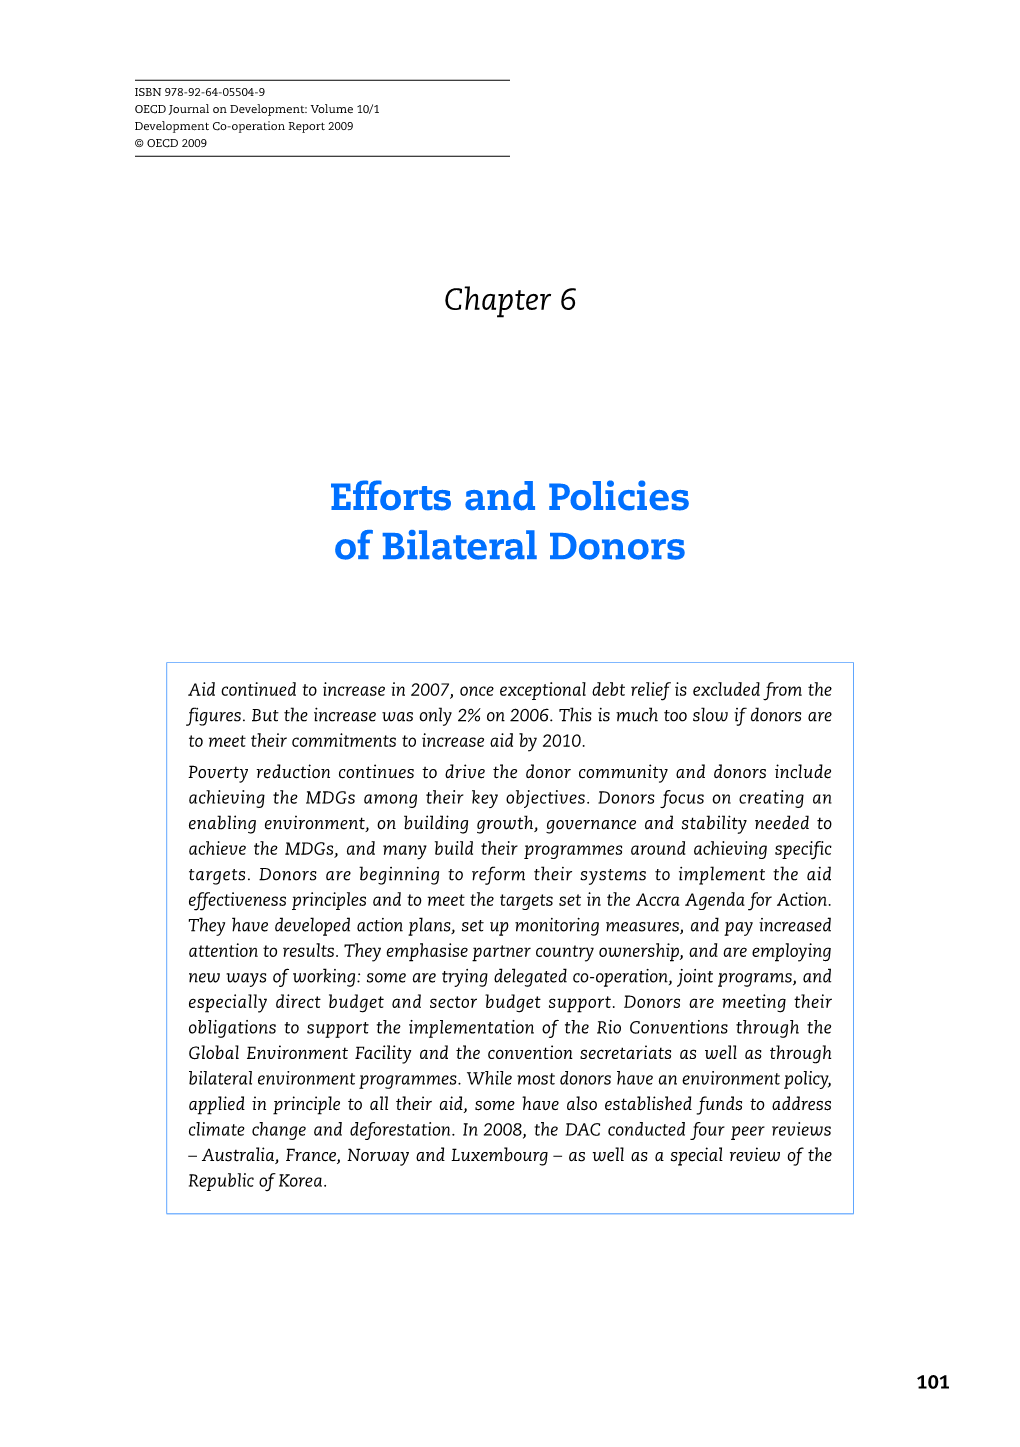 Efforts and Policies of Bilateral Donors